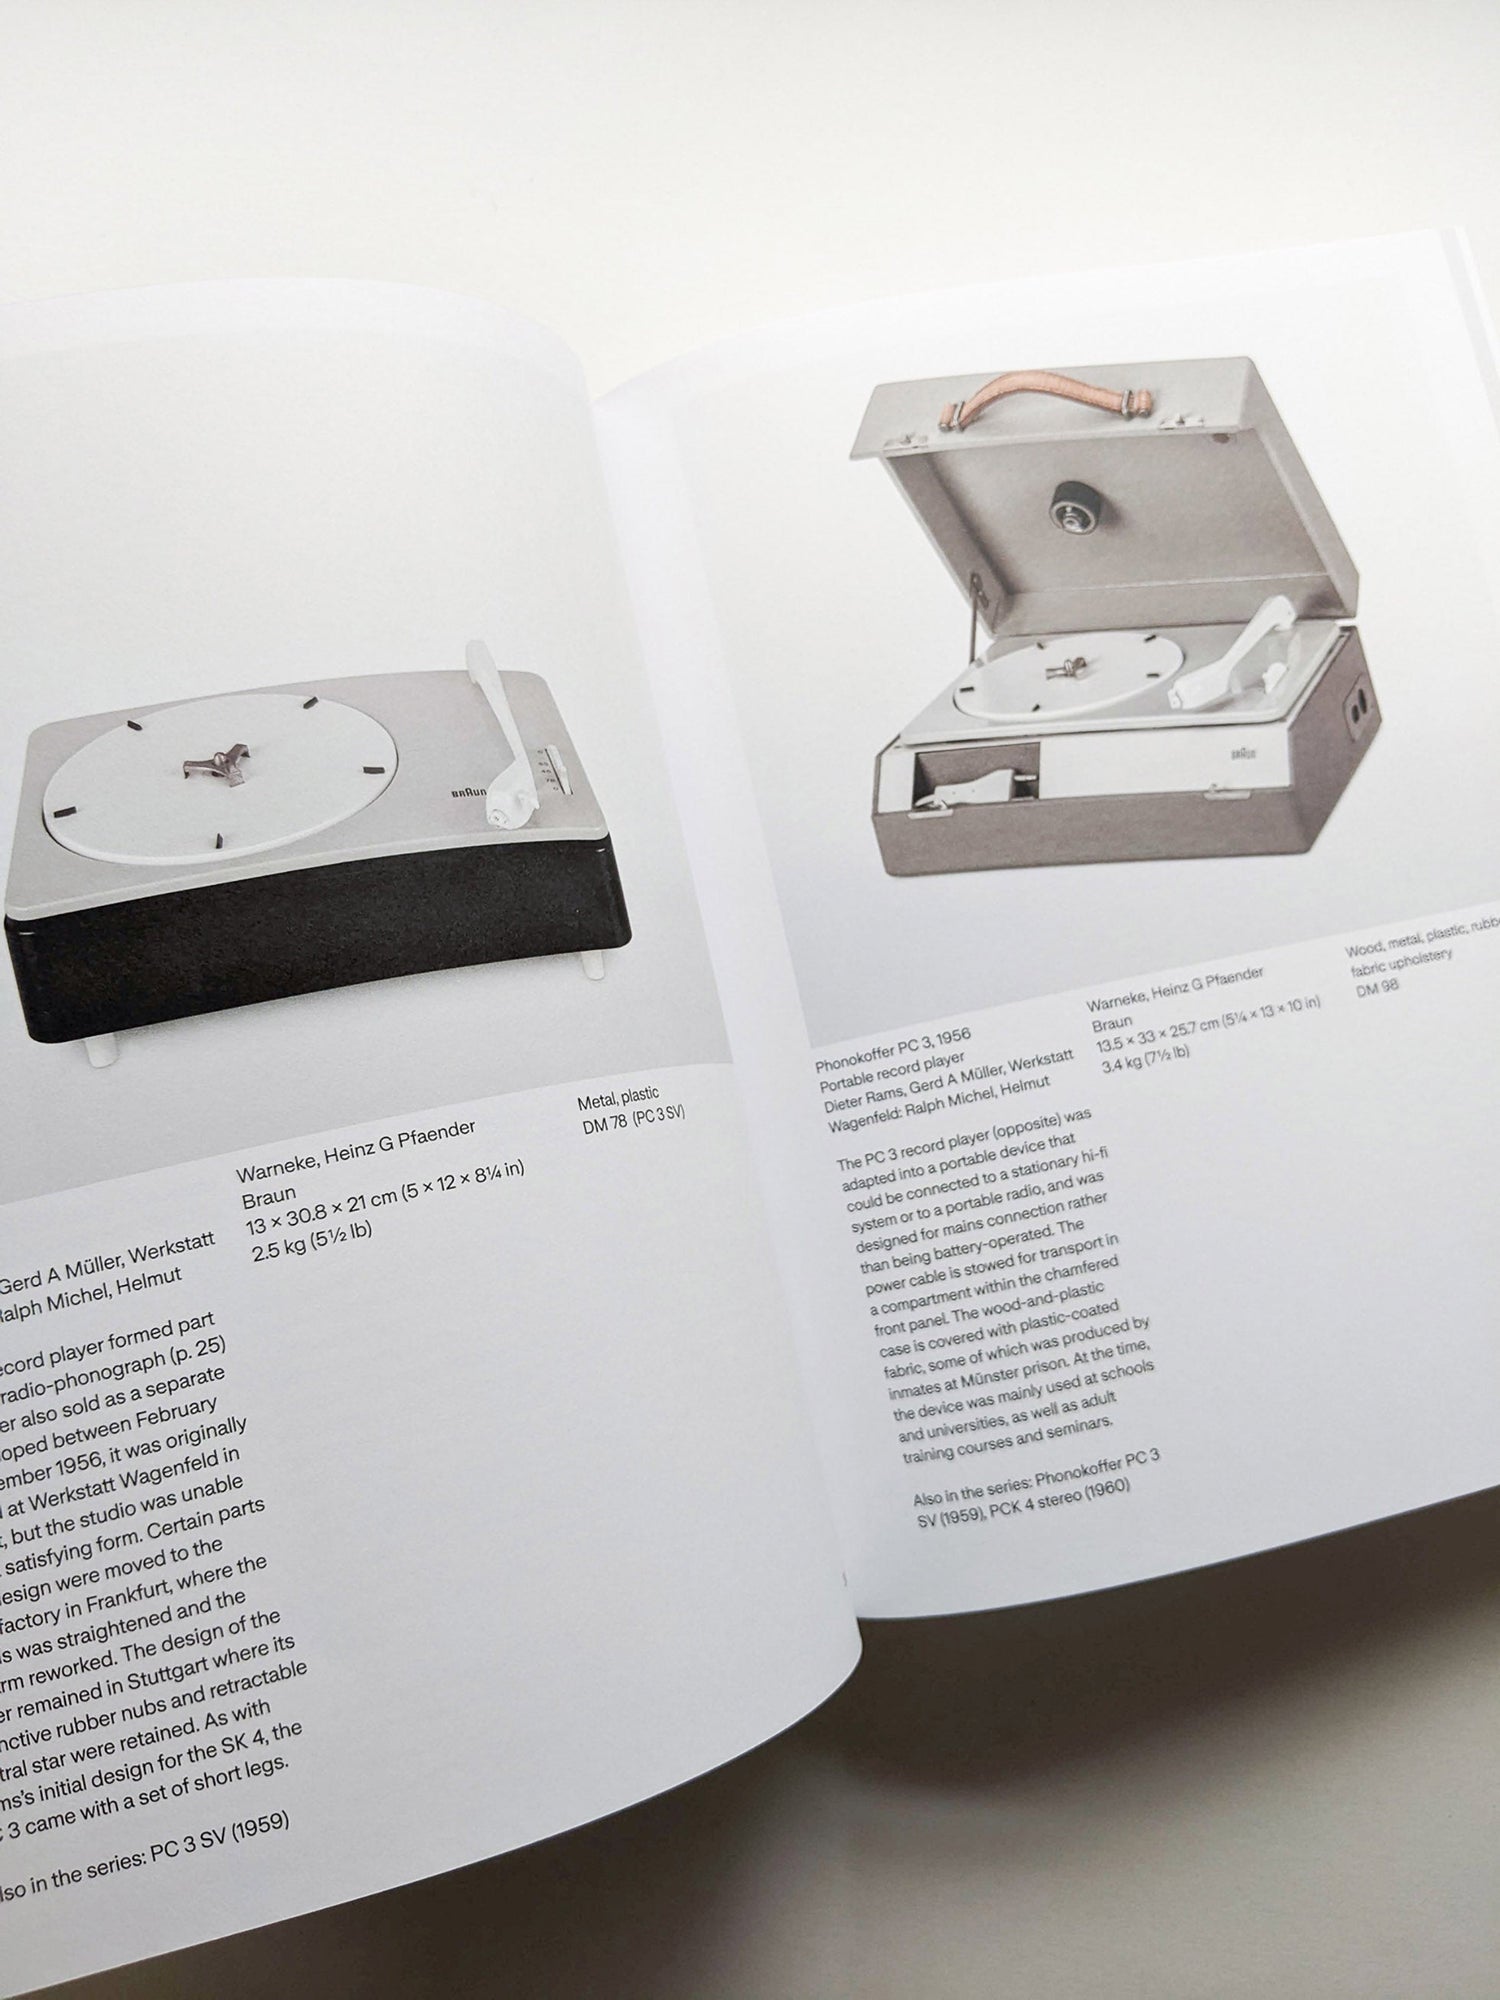 The Complete Works / Dieter Rams - 本 屋 青 旗 Ao-Hata Bookstore